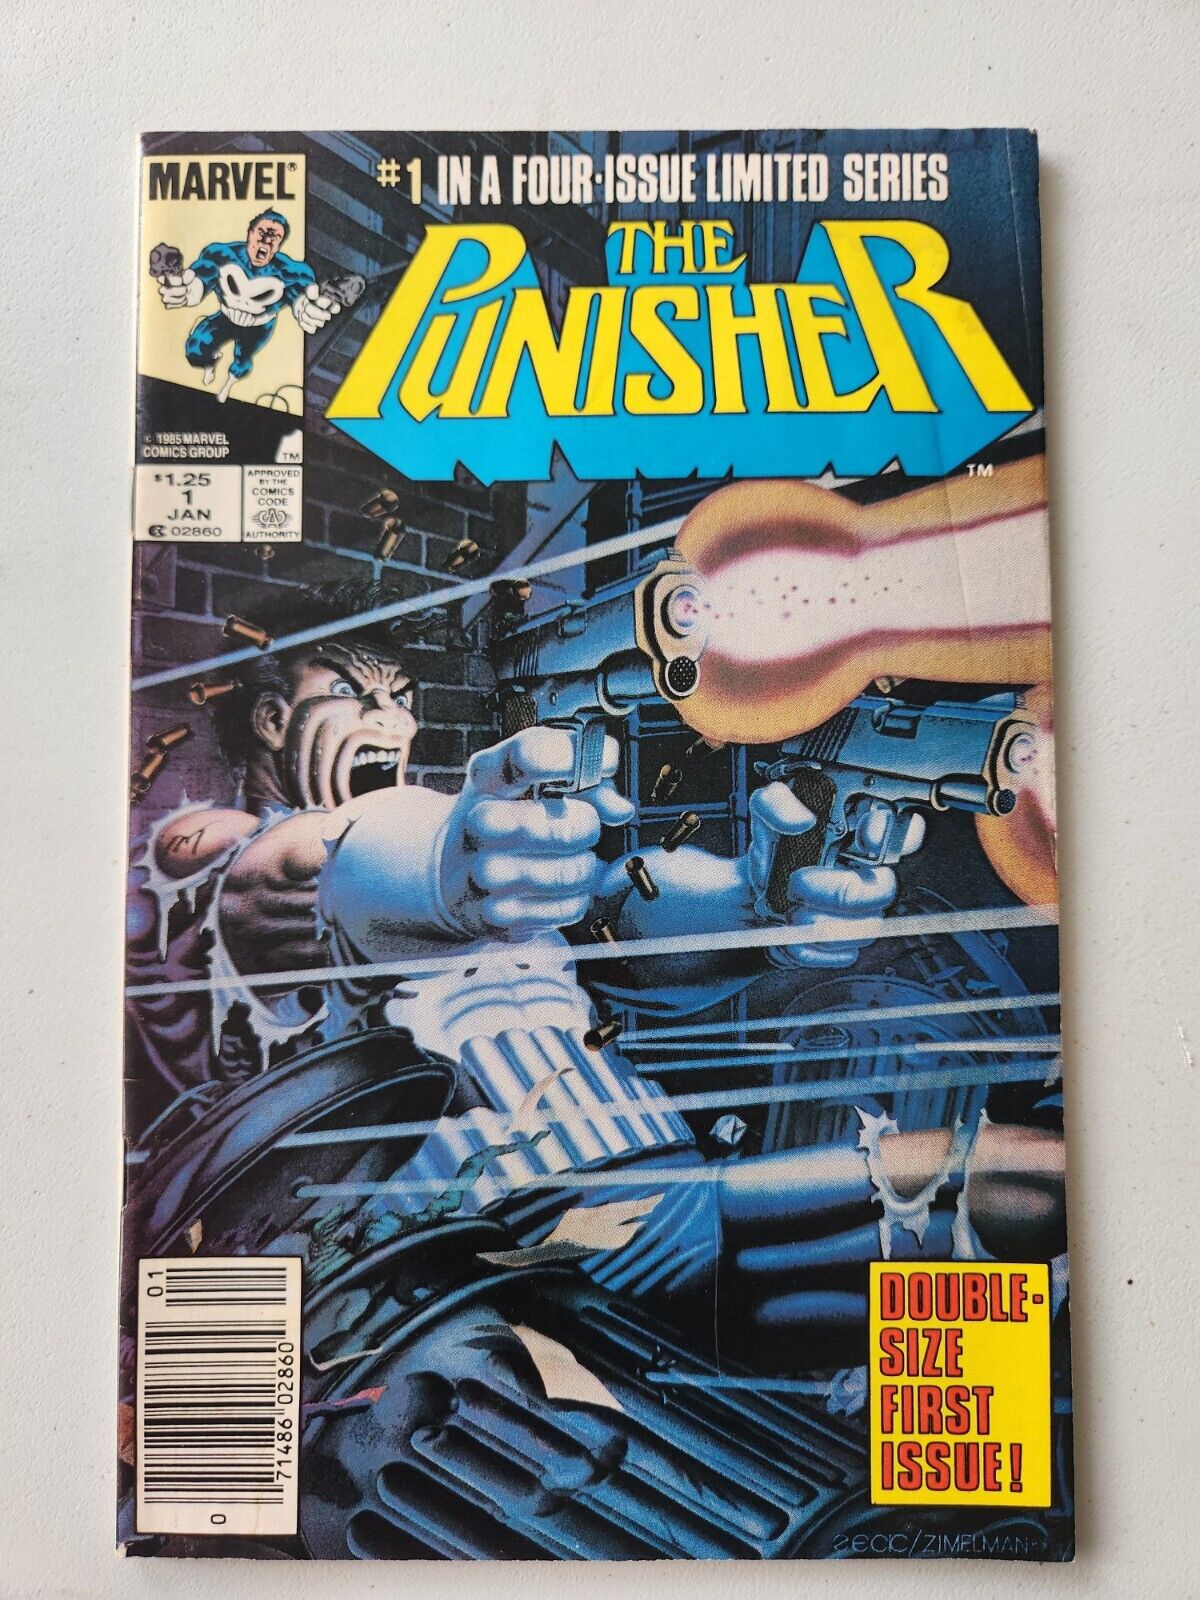 PUNISHER #1   1985. 1 OUR OF FOUR-ISSUE LIMITED SERIES. MARVEL. COMICS. 